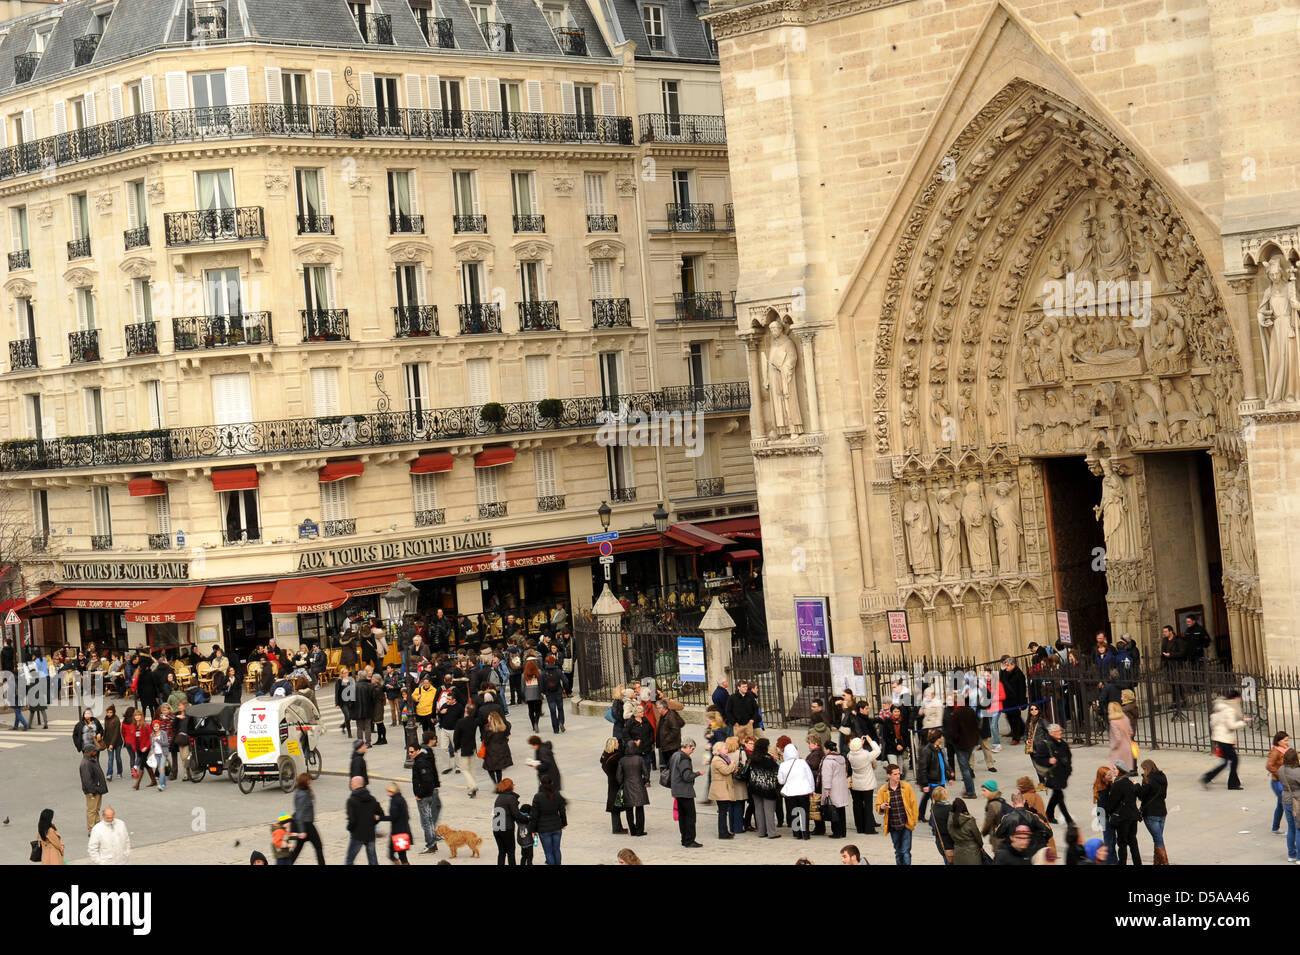 Crowded street outside the Notre Dame Paris France. tourism tourists landmark French busy streets street Stock Photo